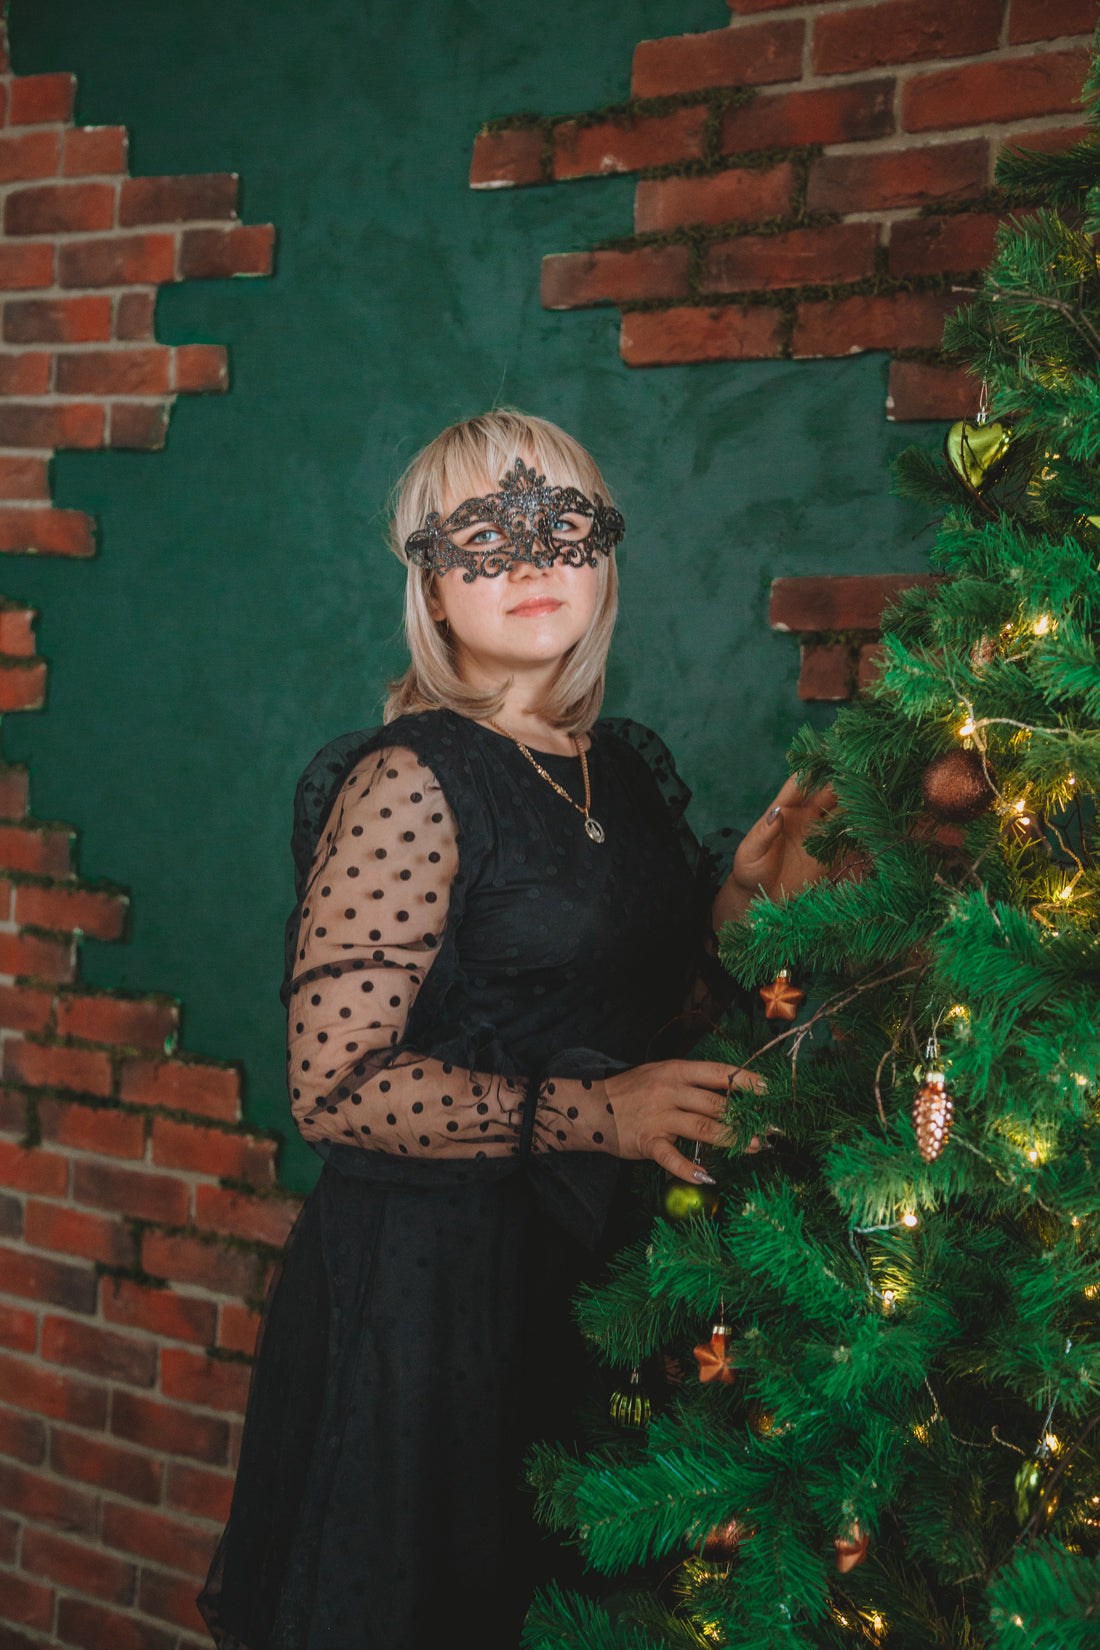 “Holiday Mask Fashion: Celebrate in Style with Festive and Seasonal Designs”